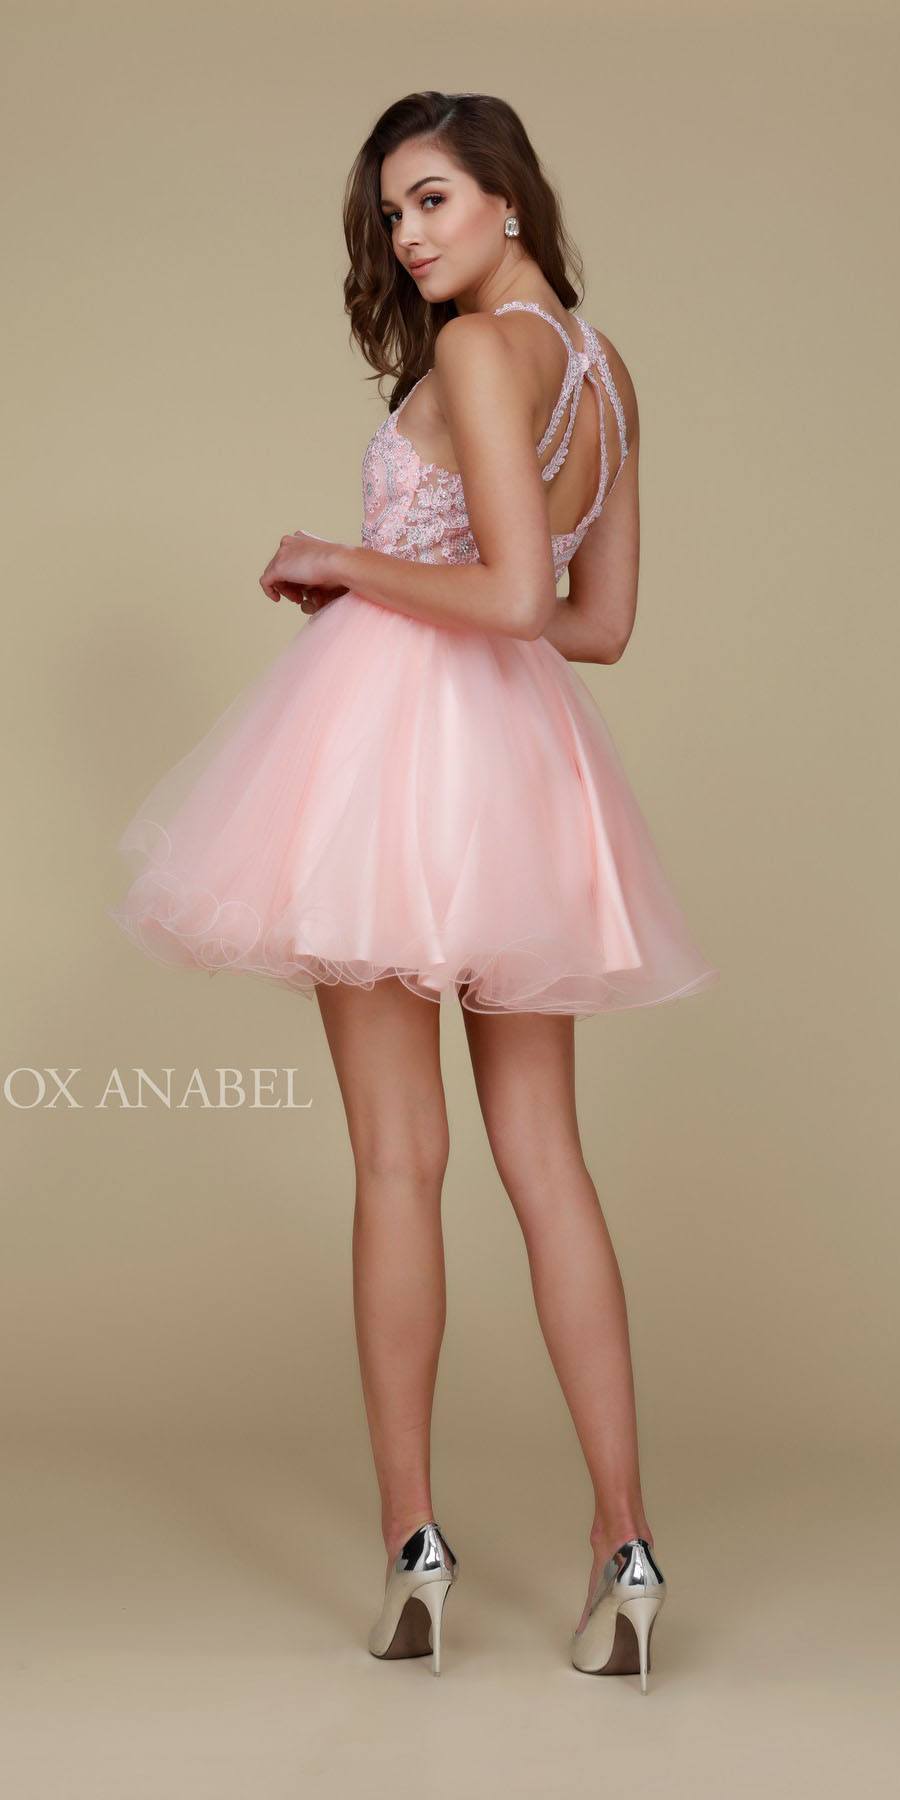 Short Blush Homecoming Dress Poofy A Line Tulle Skirt Halter Neck Back View